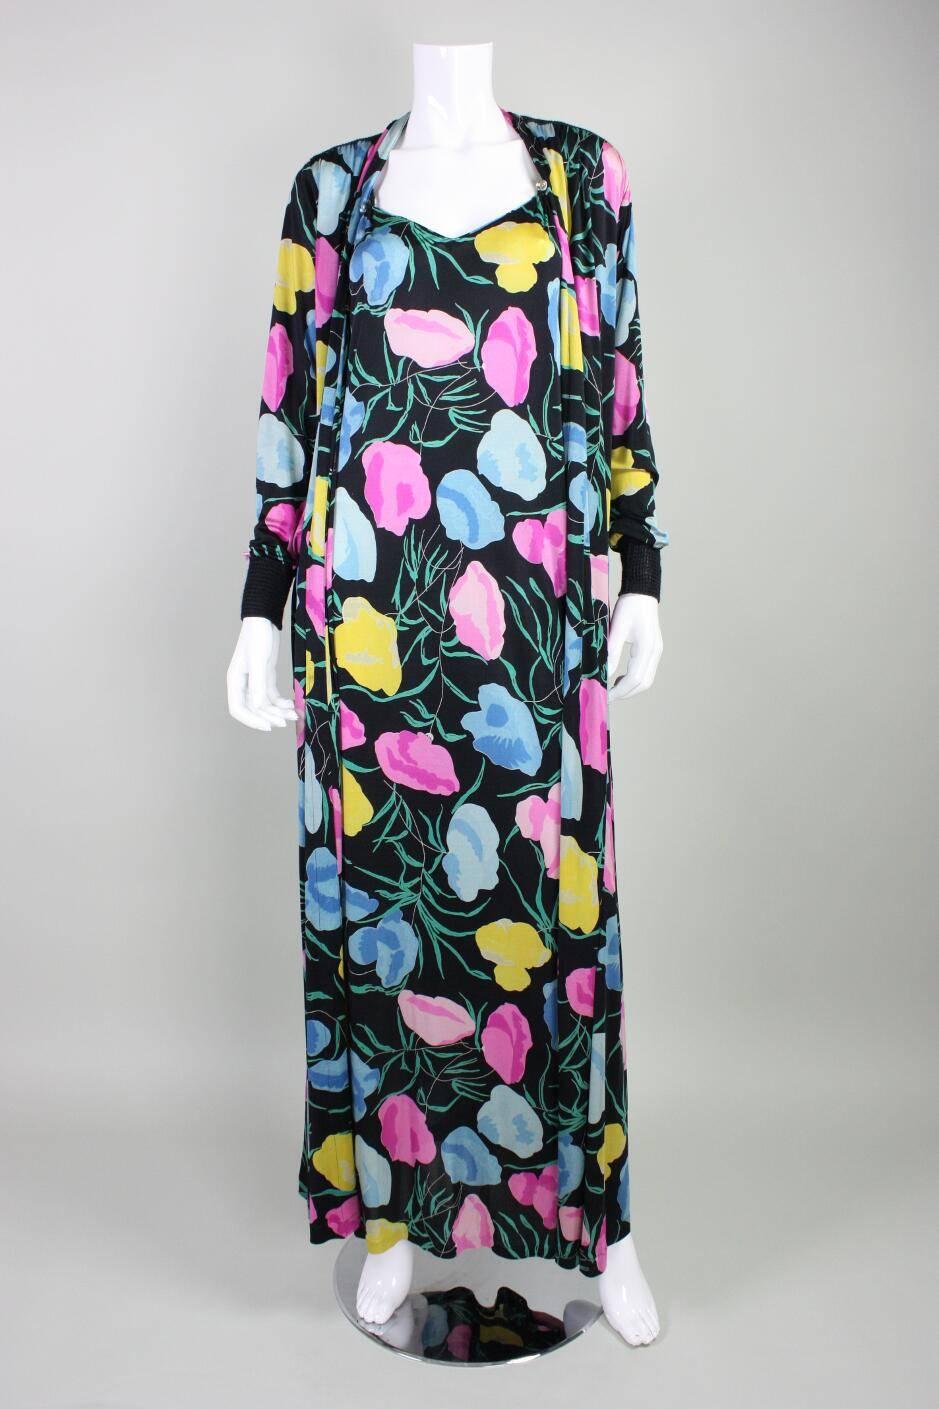 Vintage gown and jacket ensemble from Missoni dates to the 1970's and is made of silk jersey with an abstract floral print.  Sheath gown has front and back V neck with black woven spaghetti straps and a center back slit.  Ankle length jacket has